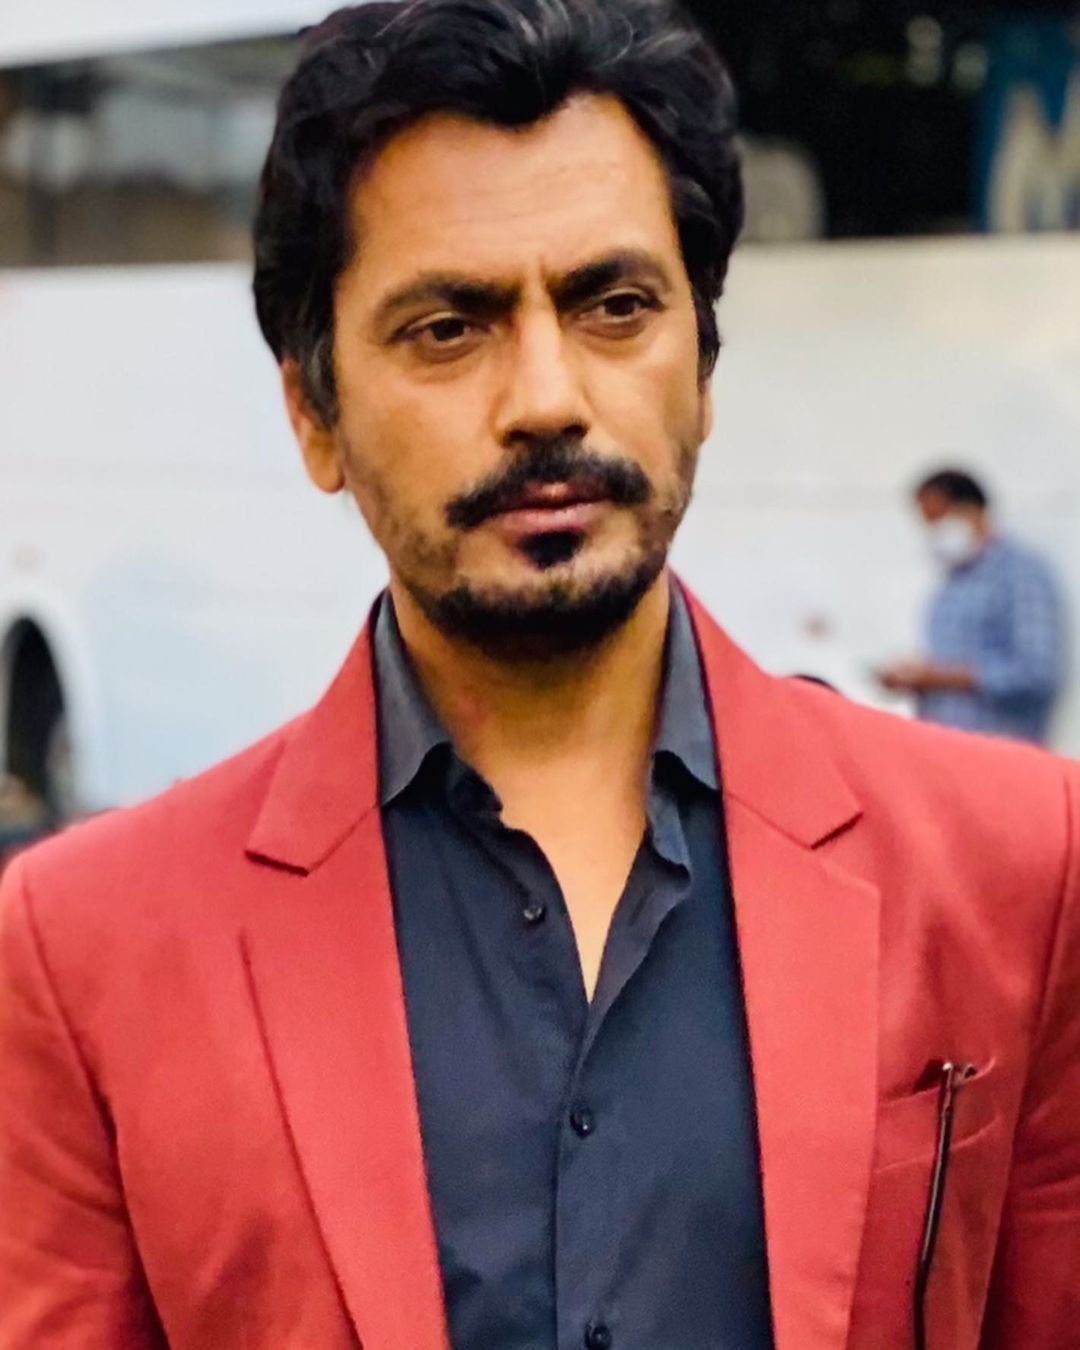 Nawazuddin Siddiqui Feels 'Most Commercial Cinema Is Brainless', Hopes OTT Educated Audiences During Pandemic